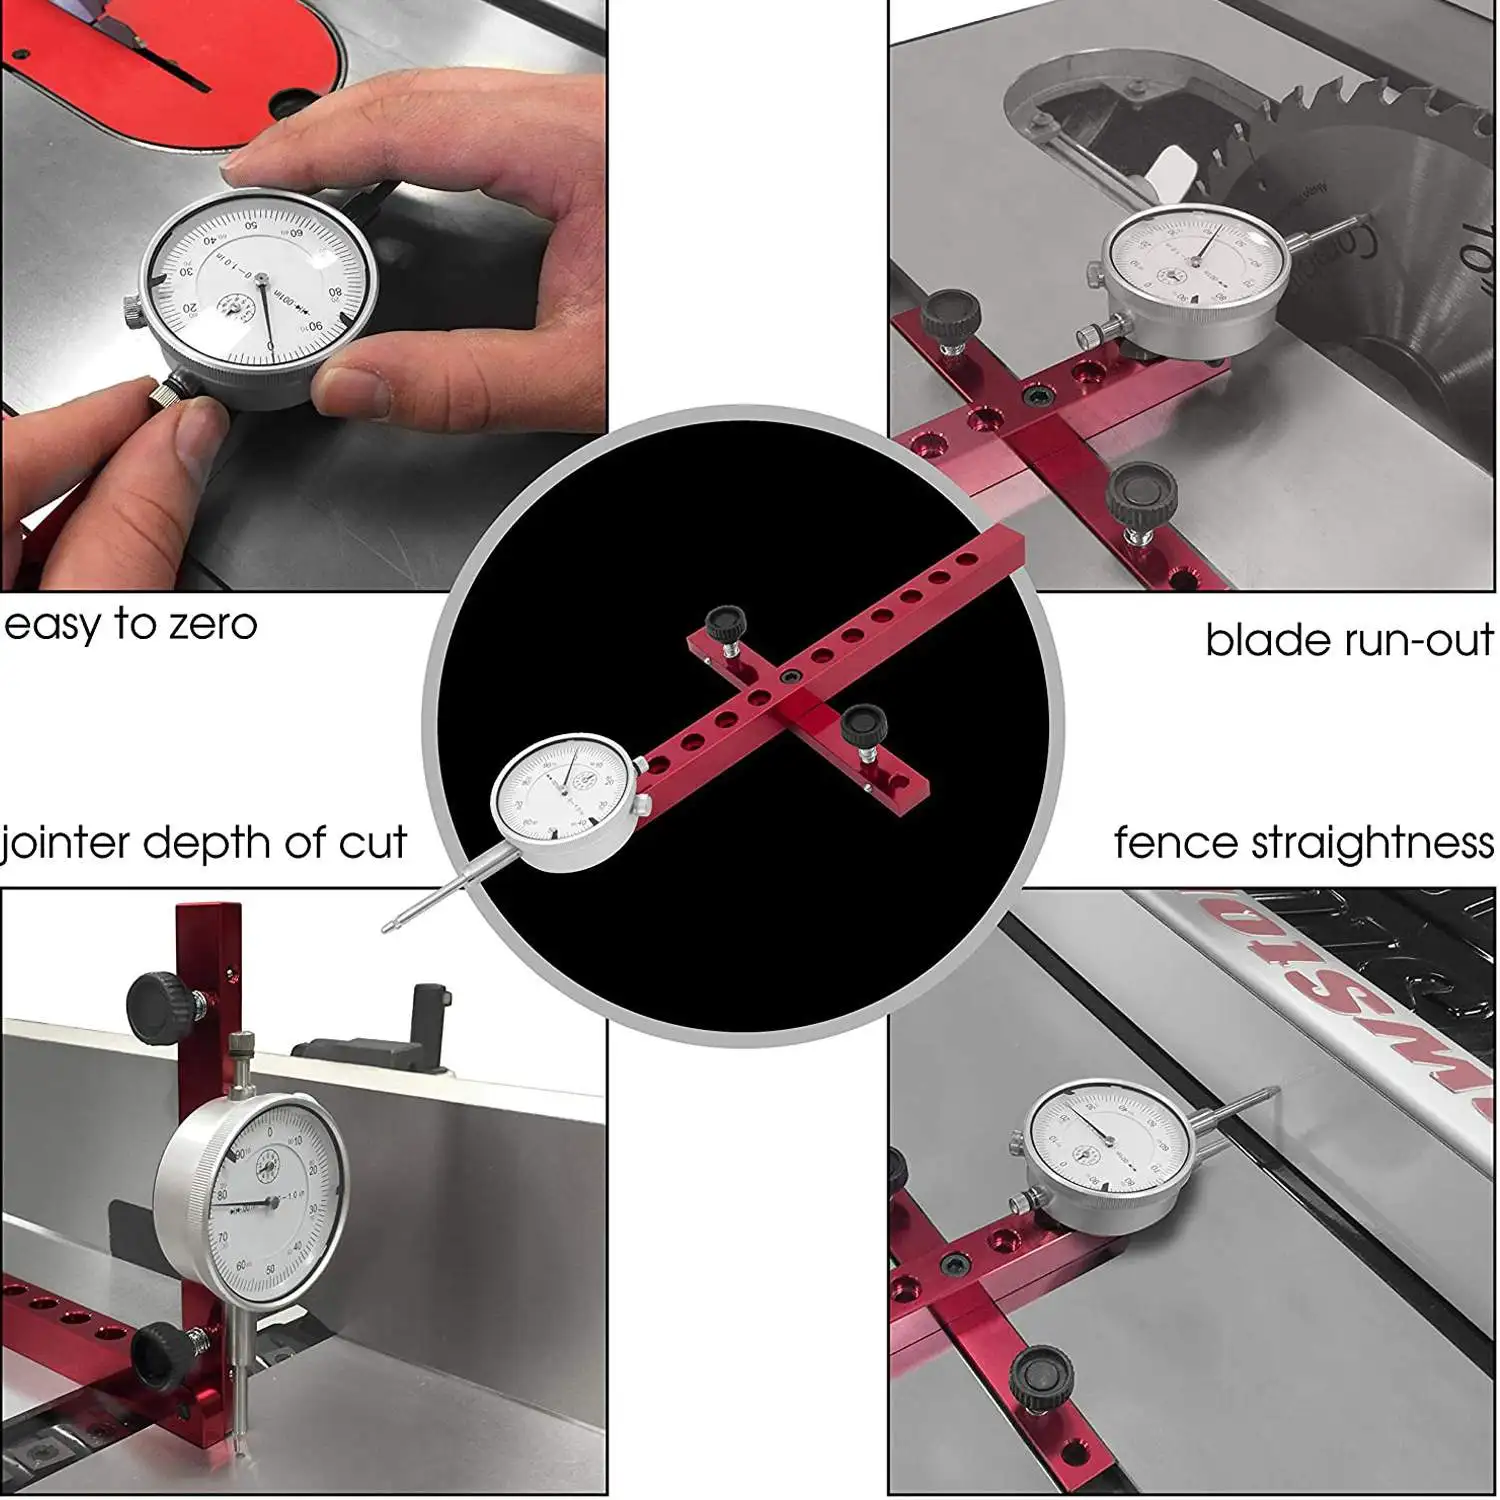 Table Saw Dial Indicator Gauge Tool Alignment System A-Line It Basic Kit Saw Table Aligning and Calibrating Machinery